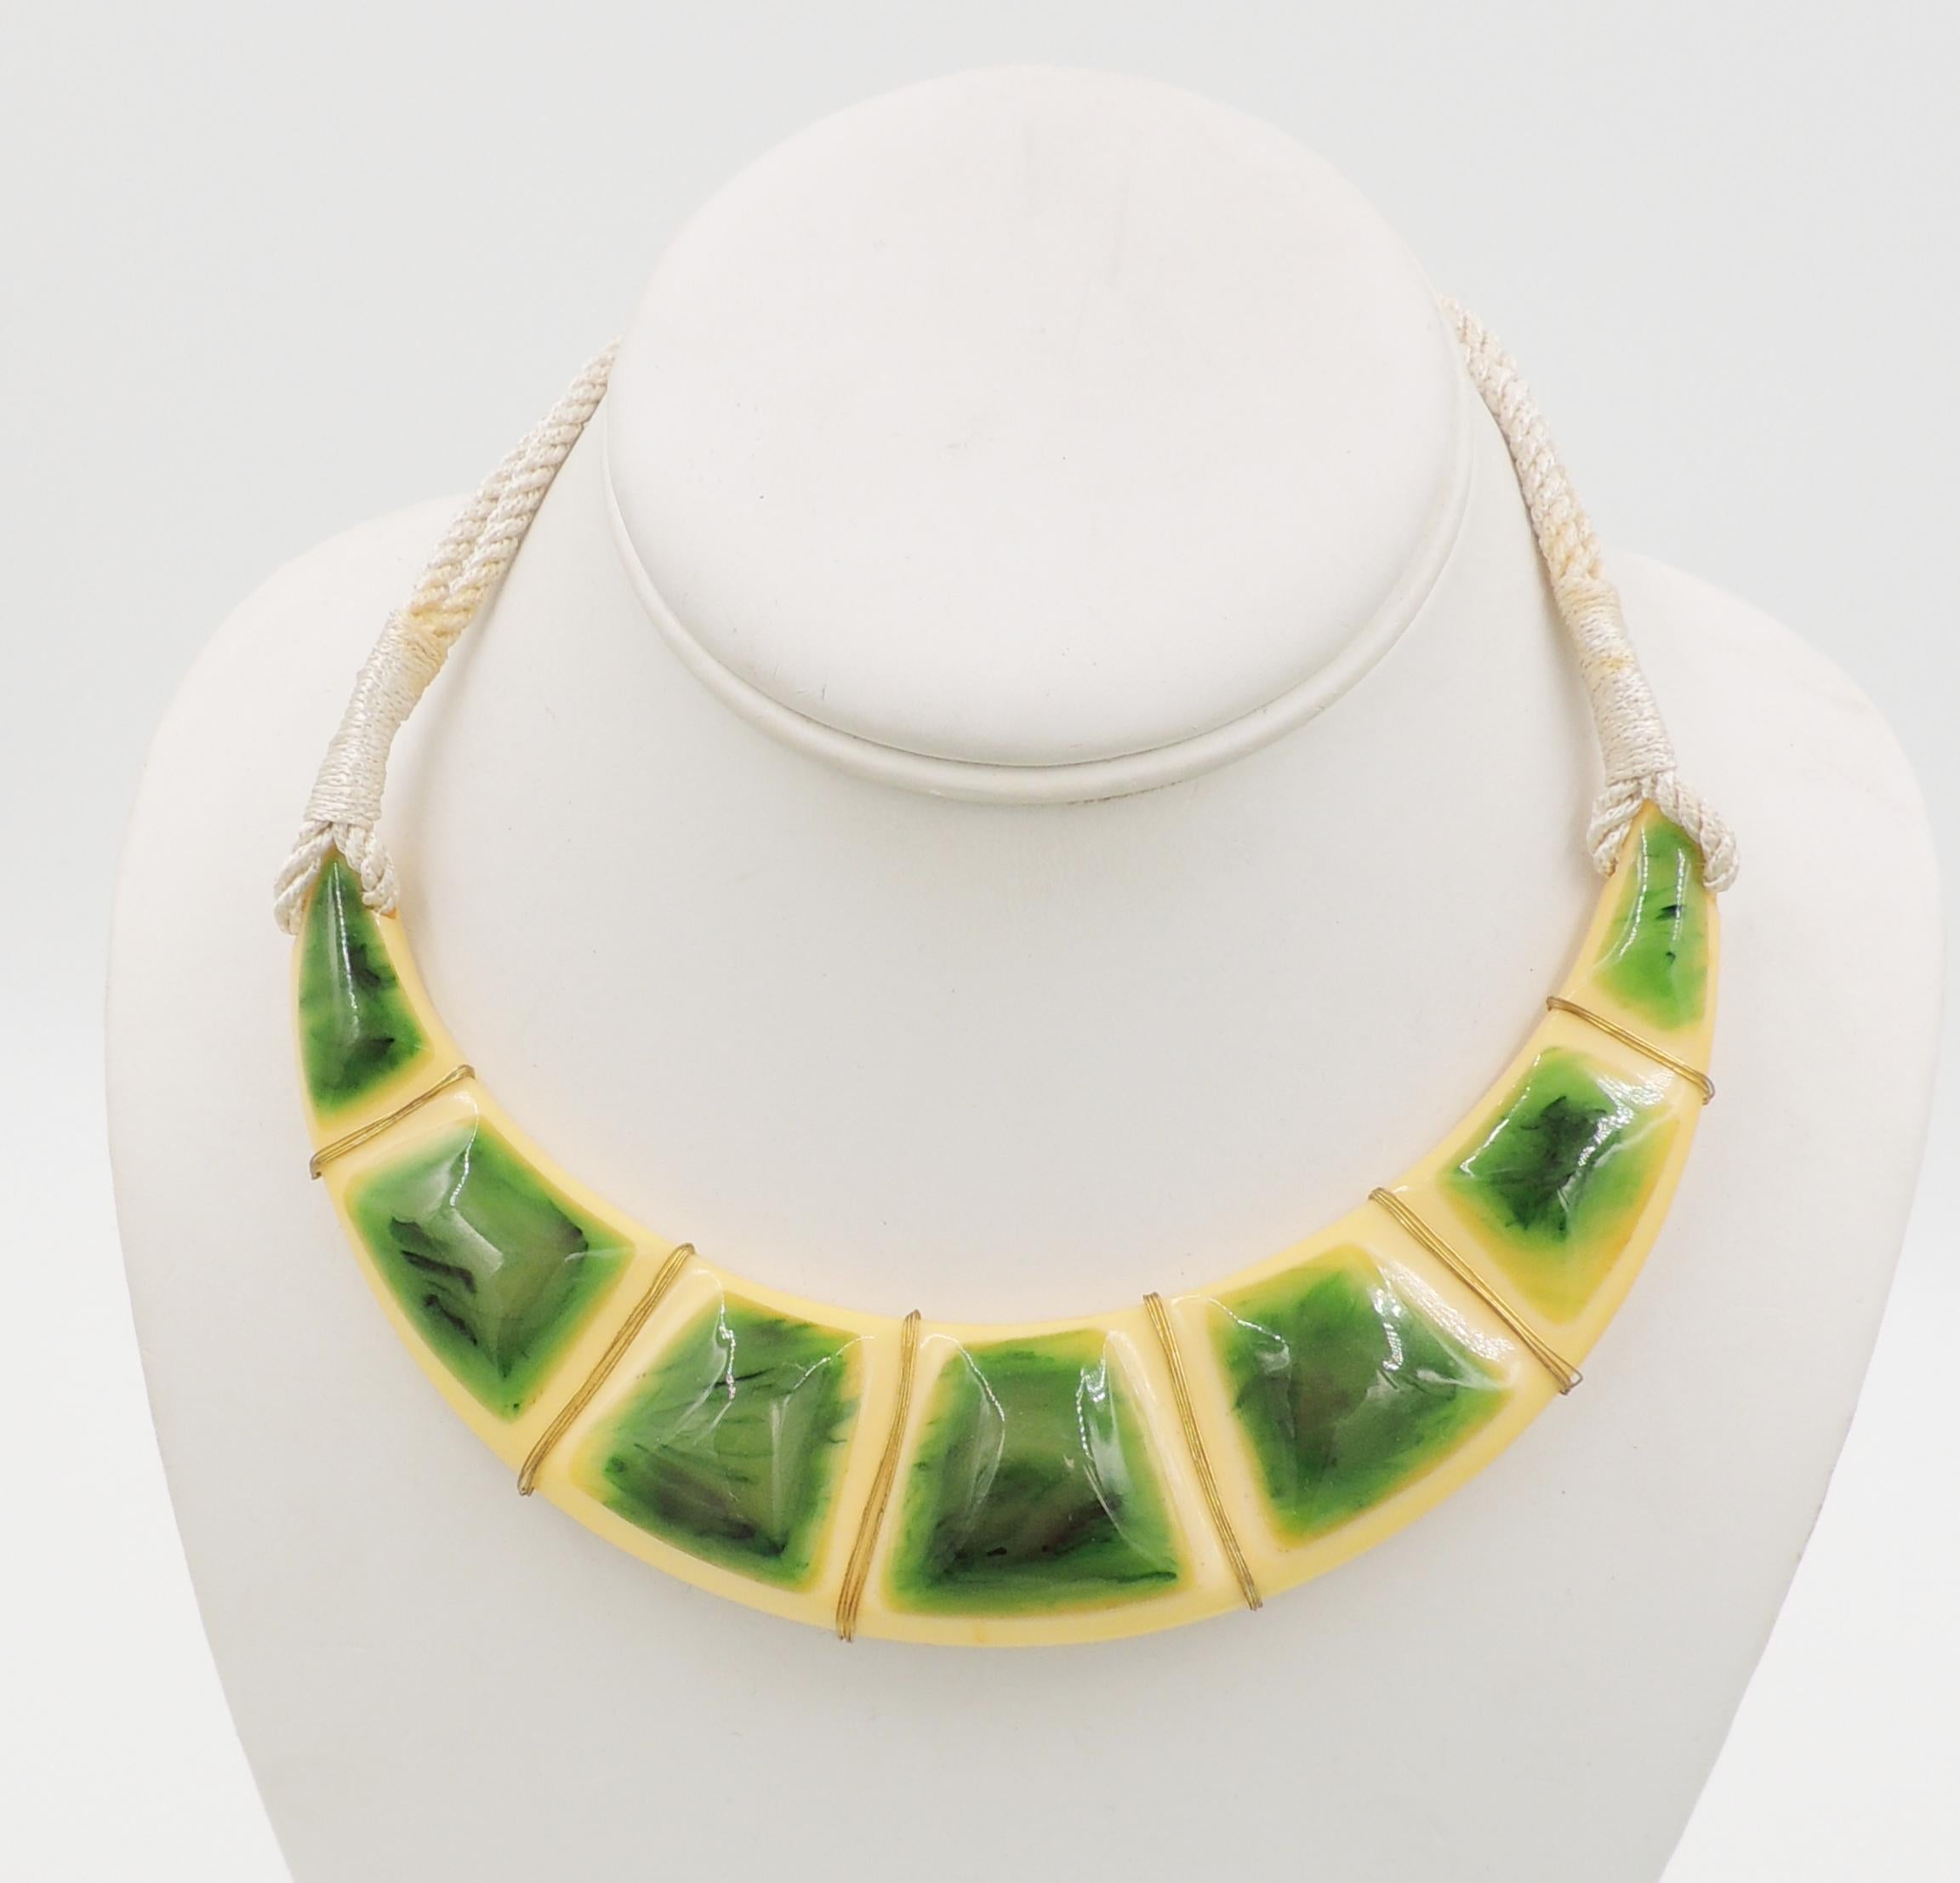 Vintage 1970s Signed Valentino Wrapped Green & Ivory Lucite Collar Necklace For Sale 1